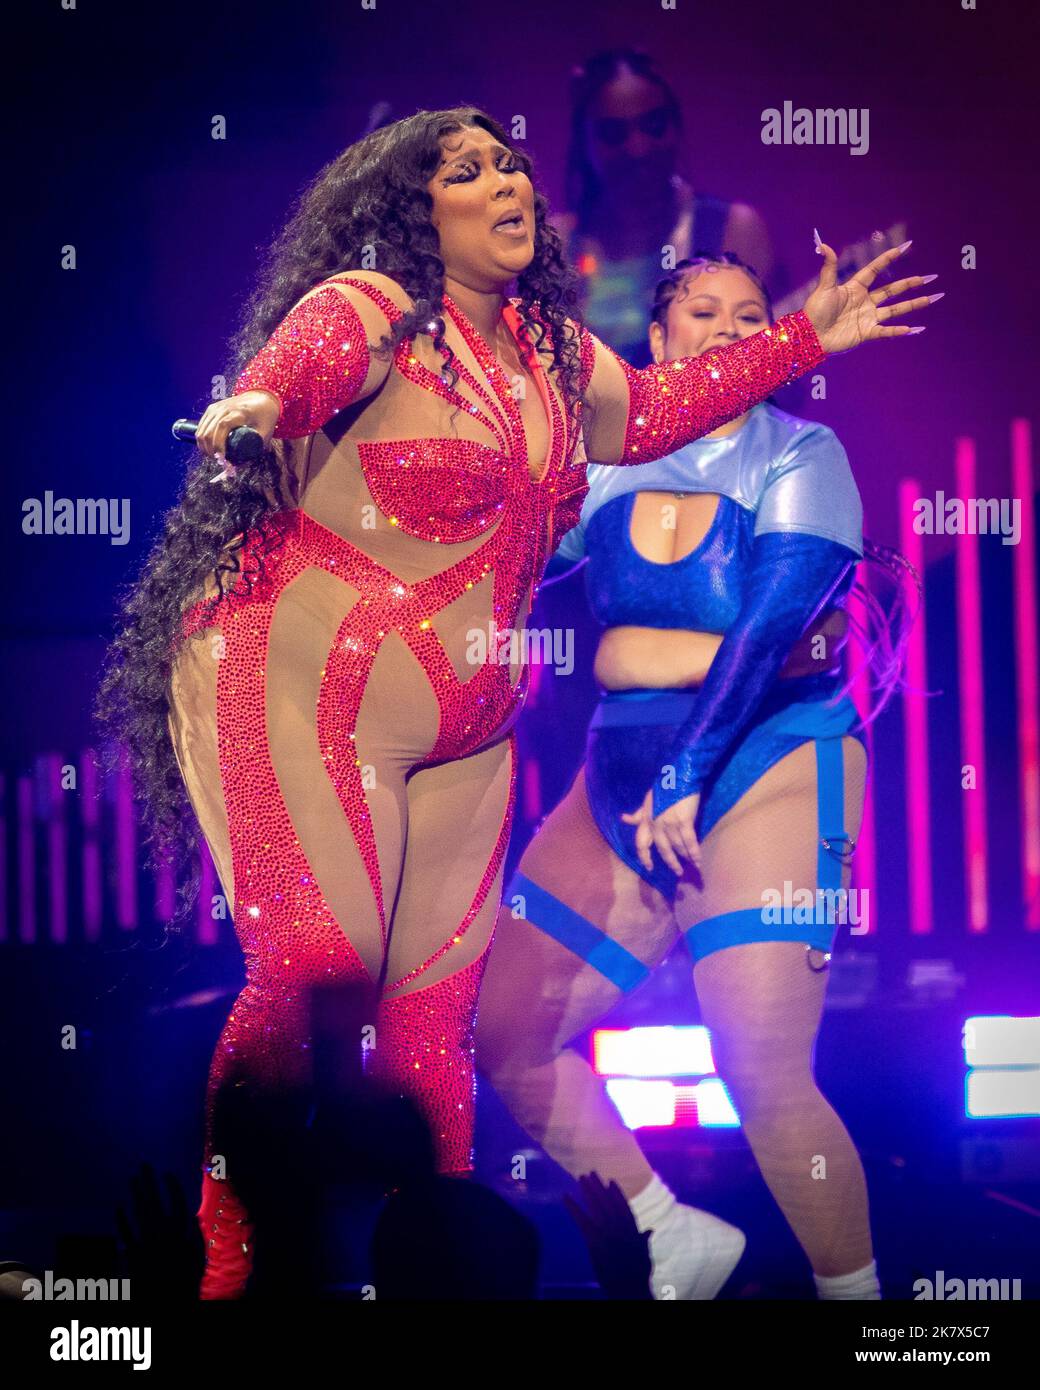 https://c8.alamy.com/comp/2K7X5C7/october-18-2022-indianapolis-indiana-usa-singer-and-rapper-lizzo-performs-during-lizzo-the-special-tour-at-gainbridge-fieldhouse-on-october-18-2022-in-indianapolis-indiana-credit-image-lora-olivezuma-press-wire-2K7X5C7.jpg